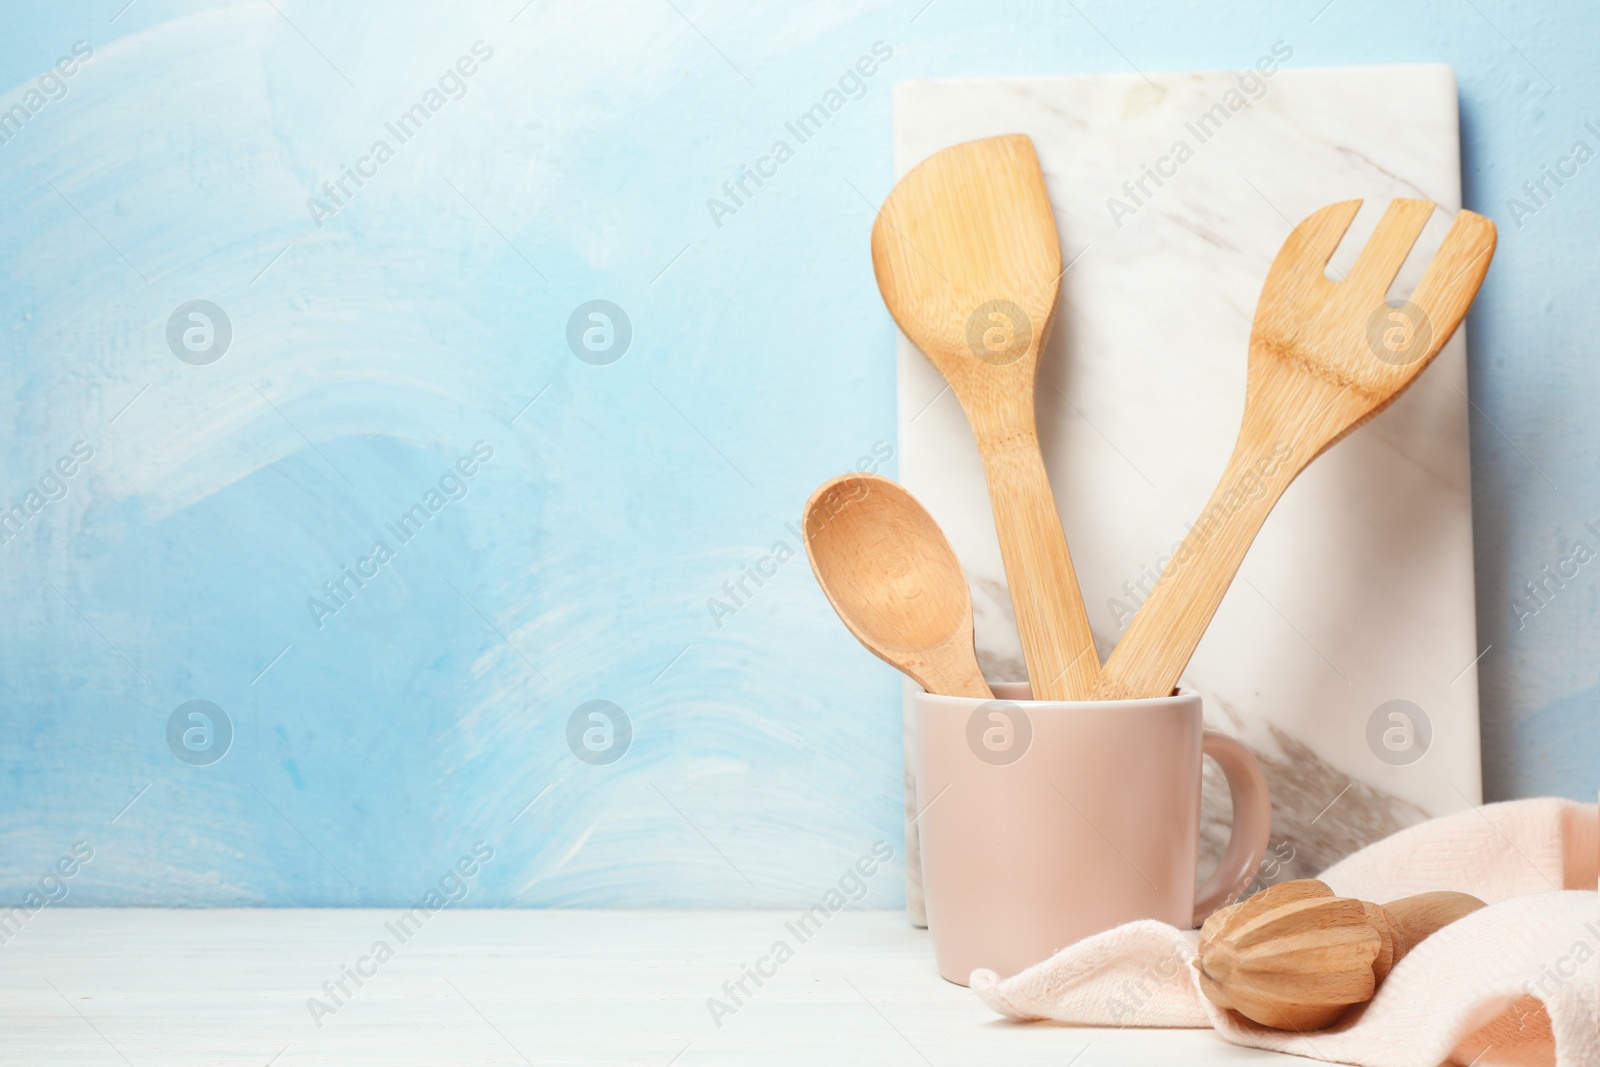 Photo of Wooden kitchen utensils, board and napkin on table. Space for text